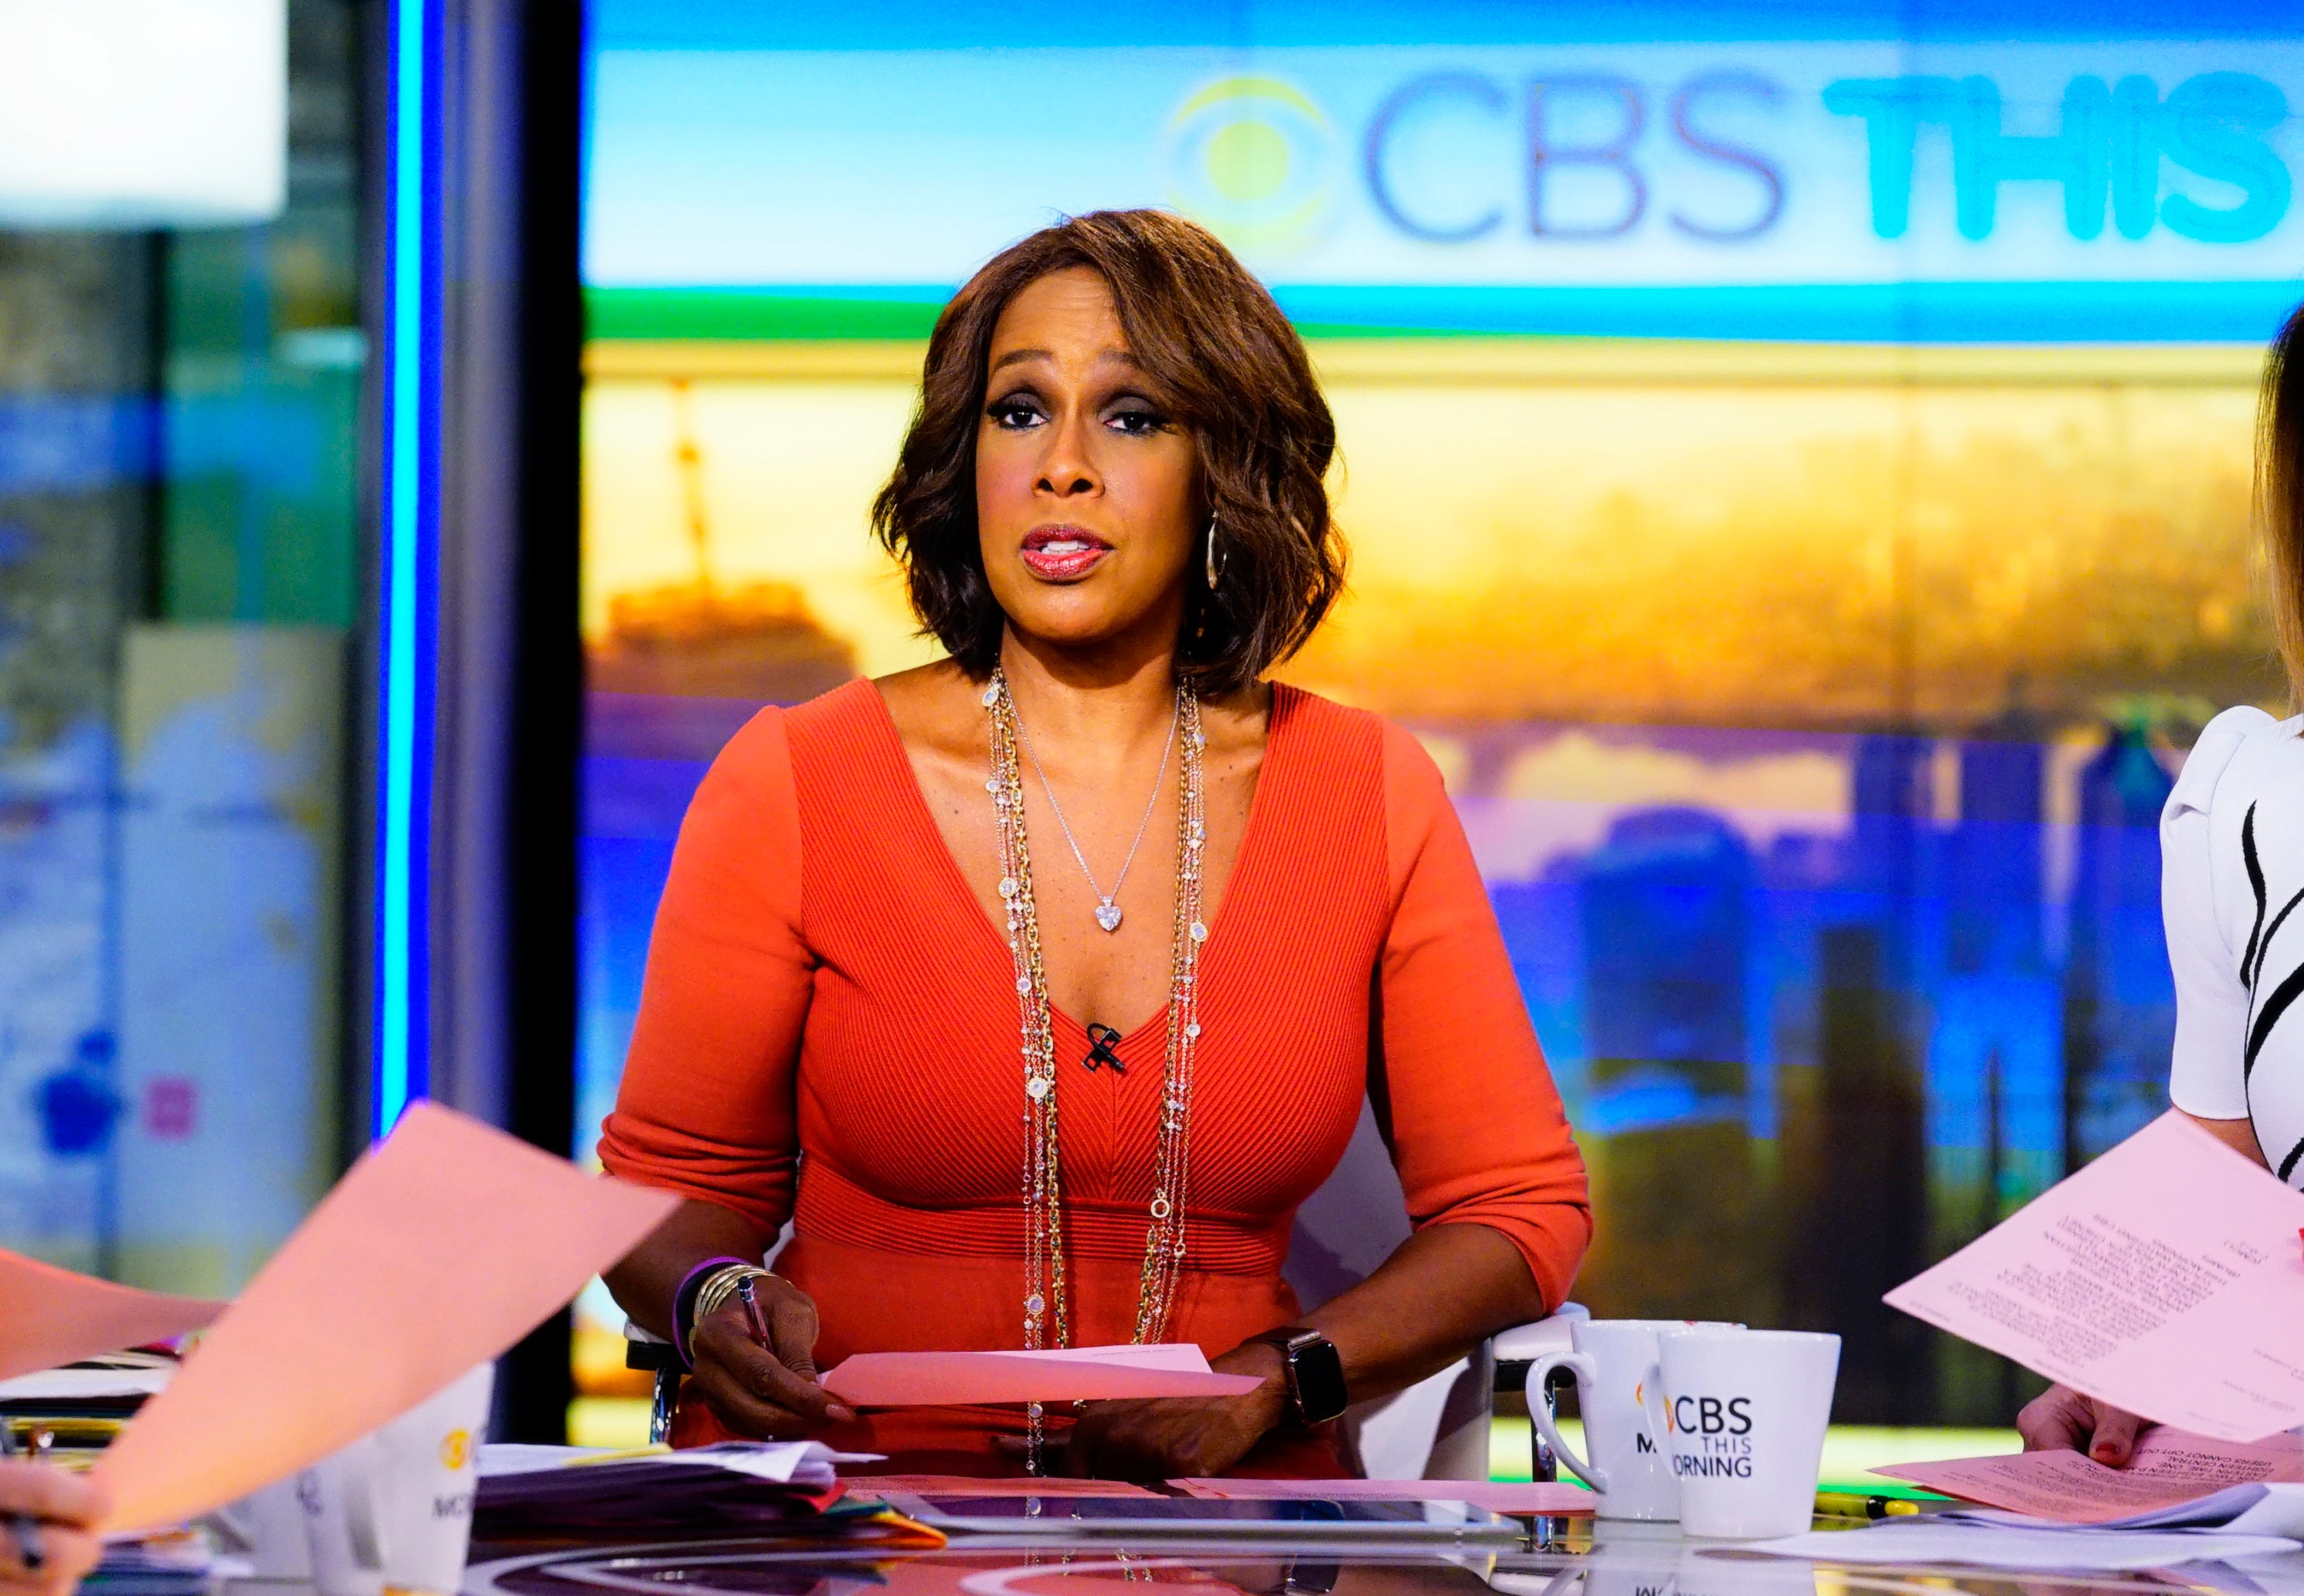 Ta-Nehisi Coates Says 'It's Wrong' To Drag Gayle King: 'We Should Be Better'